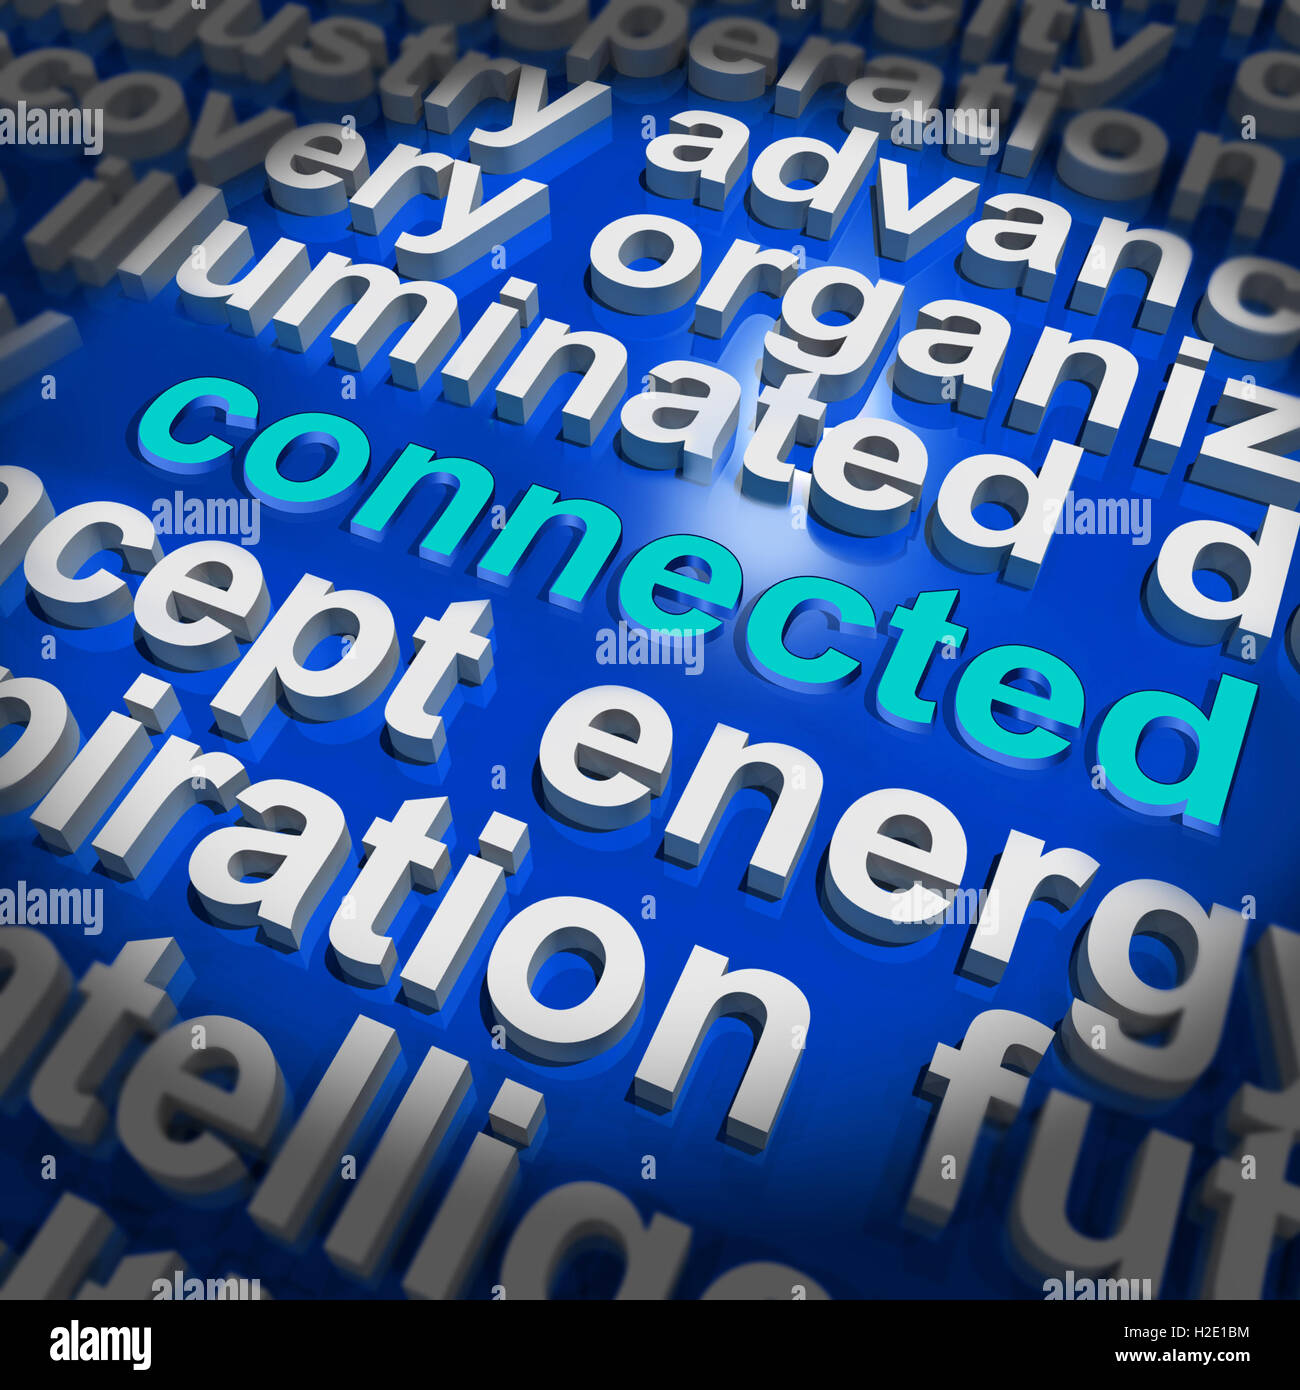 Connected Word Cloud Shows Communications And Connections Stock Photo